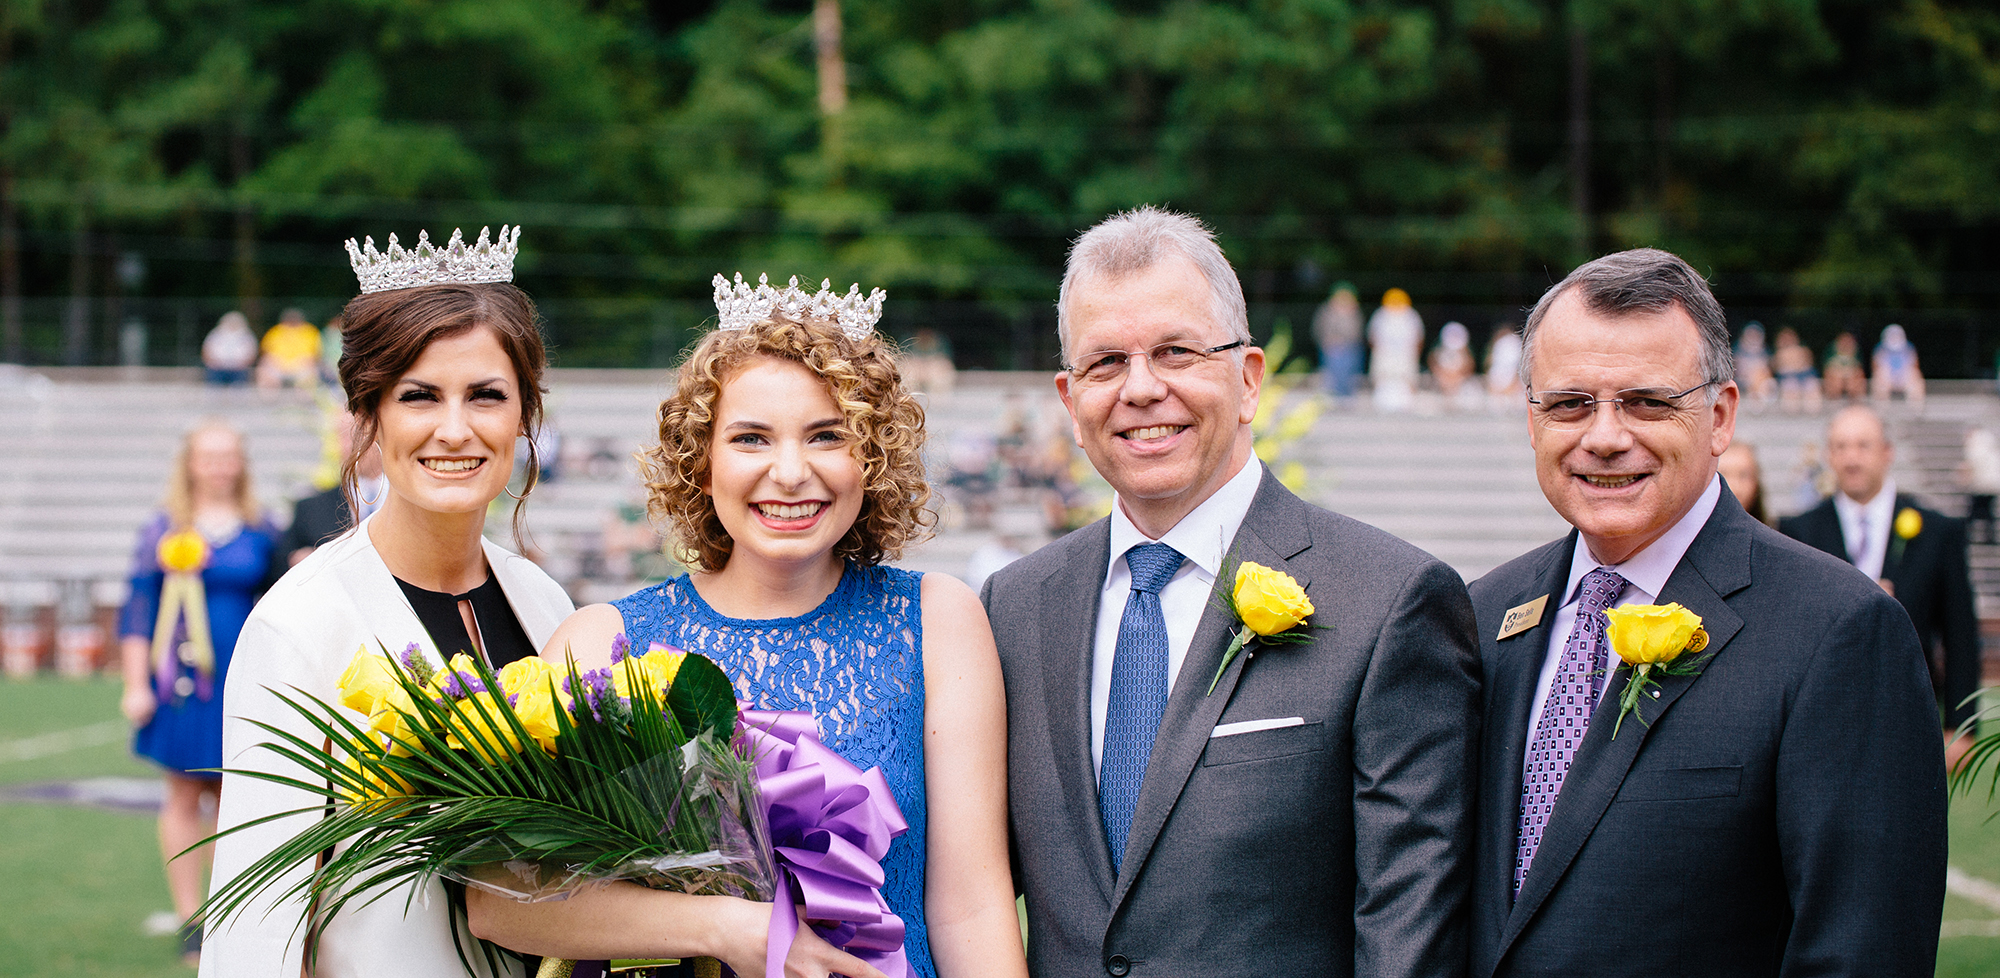 Hannah Bunch (far left), 2017 Ouachita Homecoming Queen, crowned Molly Boone as 2018 Ouachita Homecoming Court. Boone was escorted by her father, Tim Boone, and recognized by Ouachita President Ben Sells (far right).